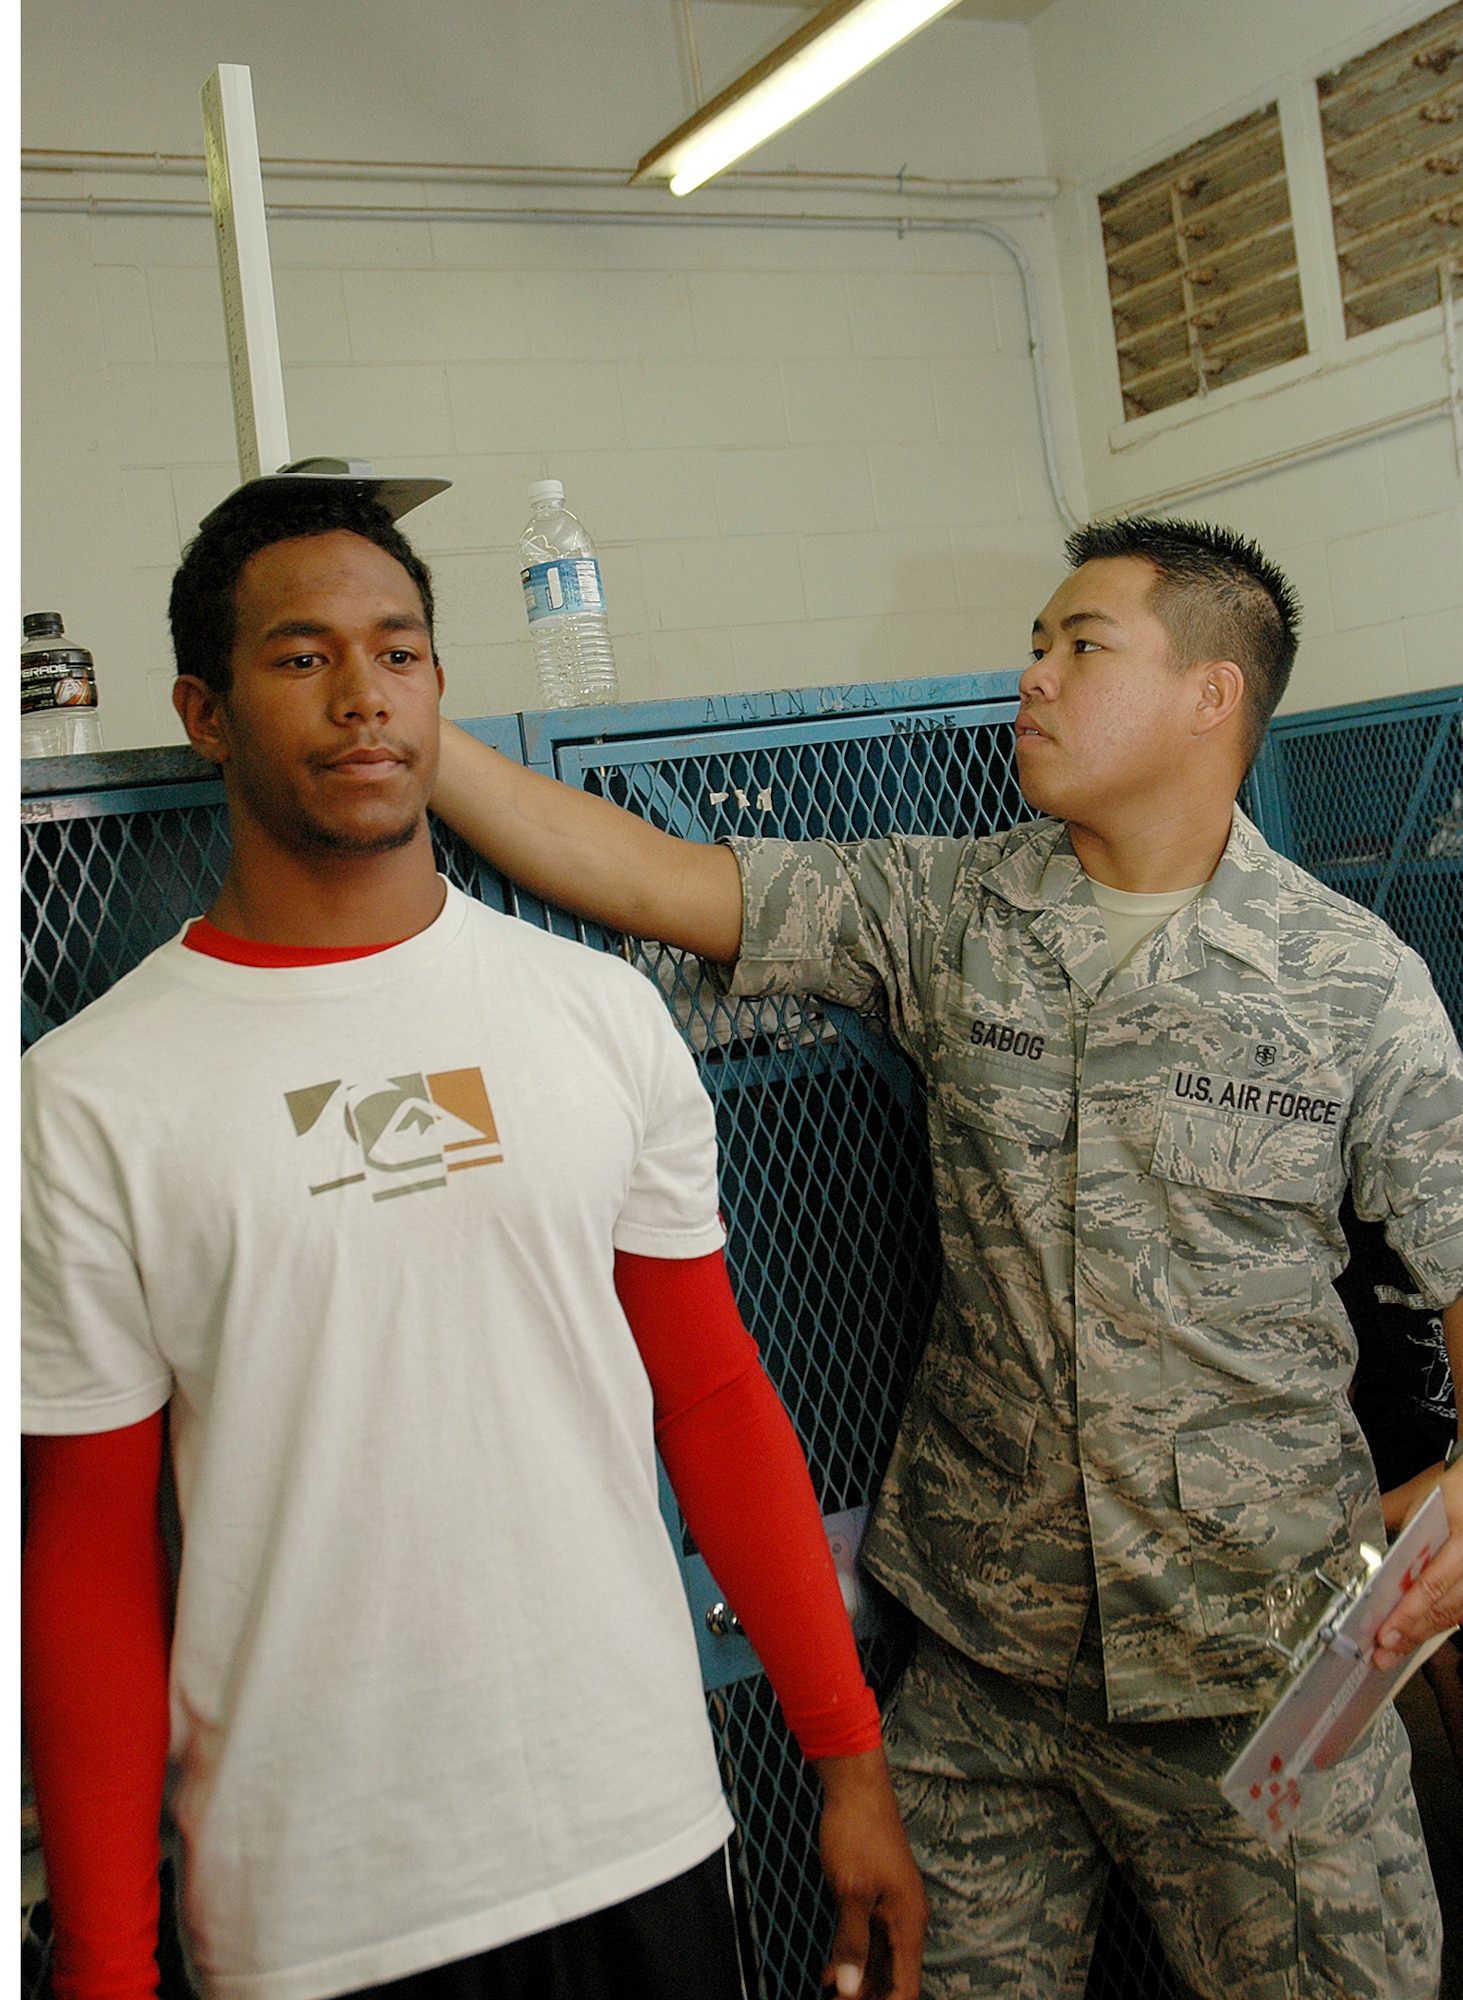 Airman First Class Anthony Sabong, medical technician, 154th Medical Group, Hawaii Air National Guard, measures the height of Waianae High School student athlete during sports physicals given by Air National Guard members at Waianae High School, in Waianae, Hawaii, July 14. The physicals were part of the Innovative Readiness Training that took place from July 12-17, on the Leeward Coast of Oahu.(U.S. Air Force photo/Tech. Sgt. Betty J. Squatrito-Martin)